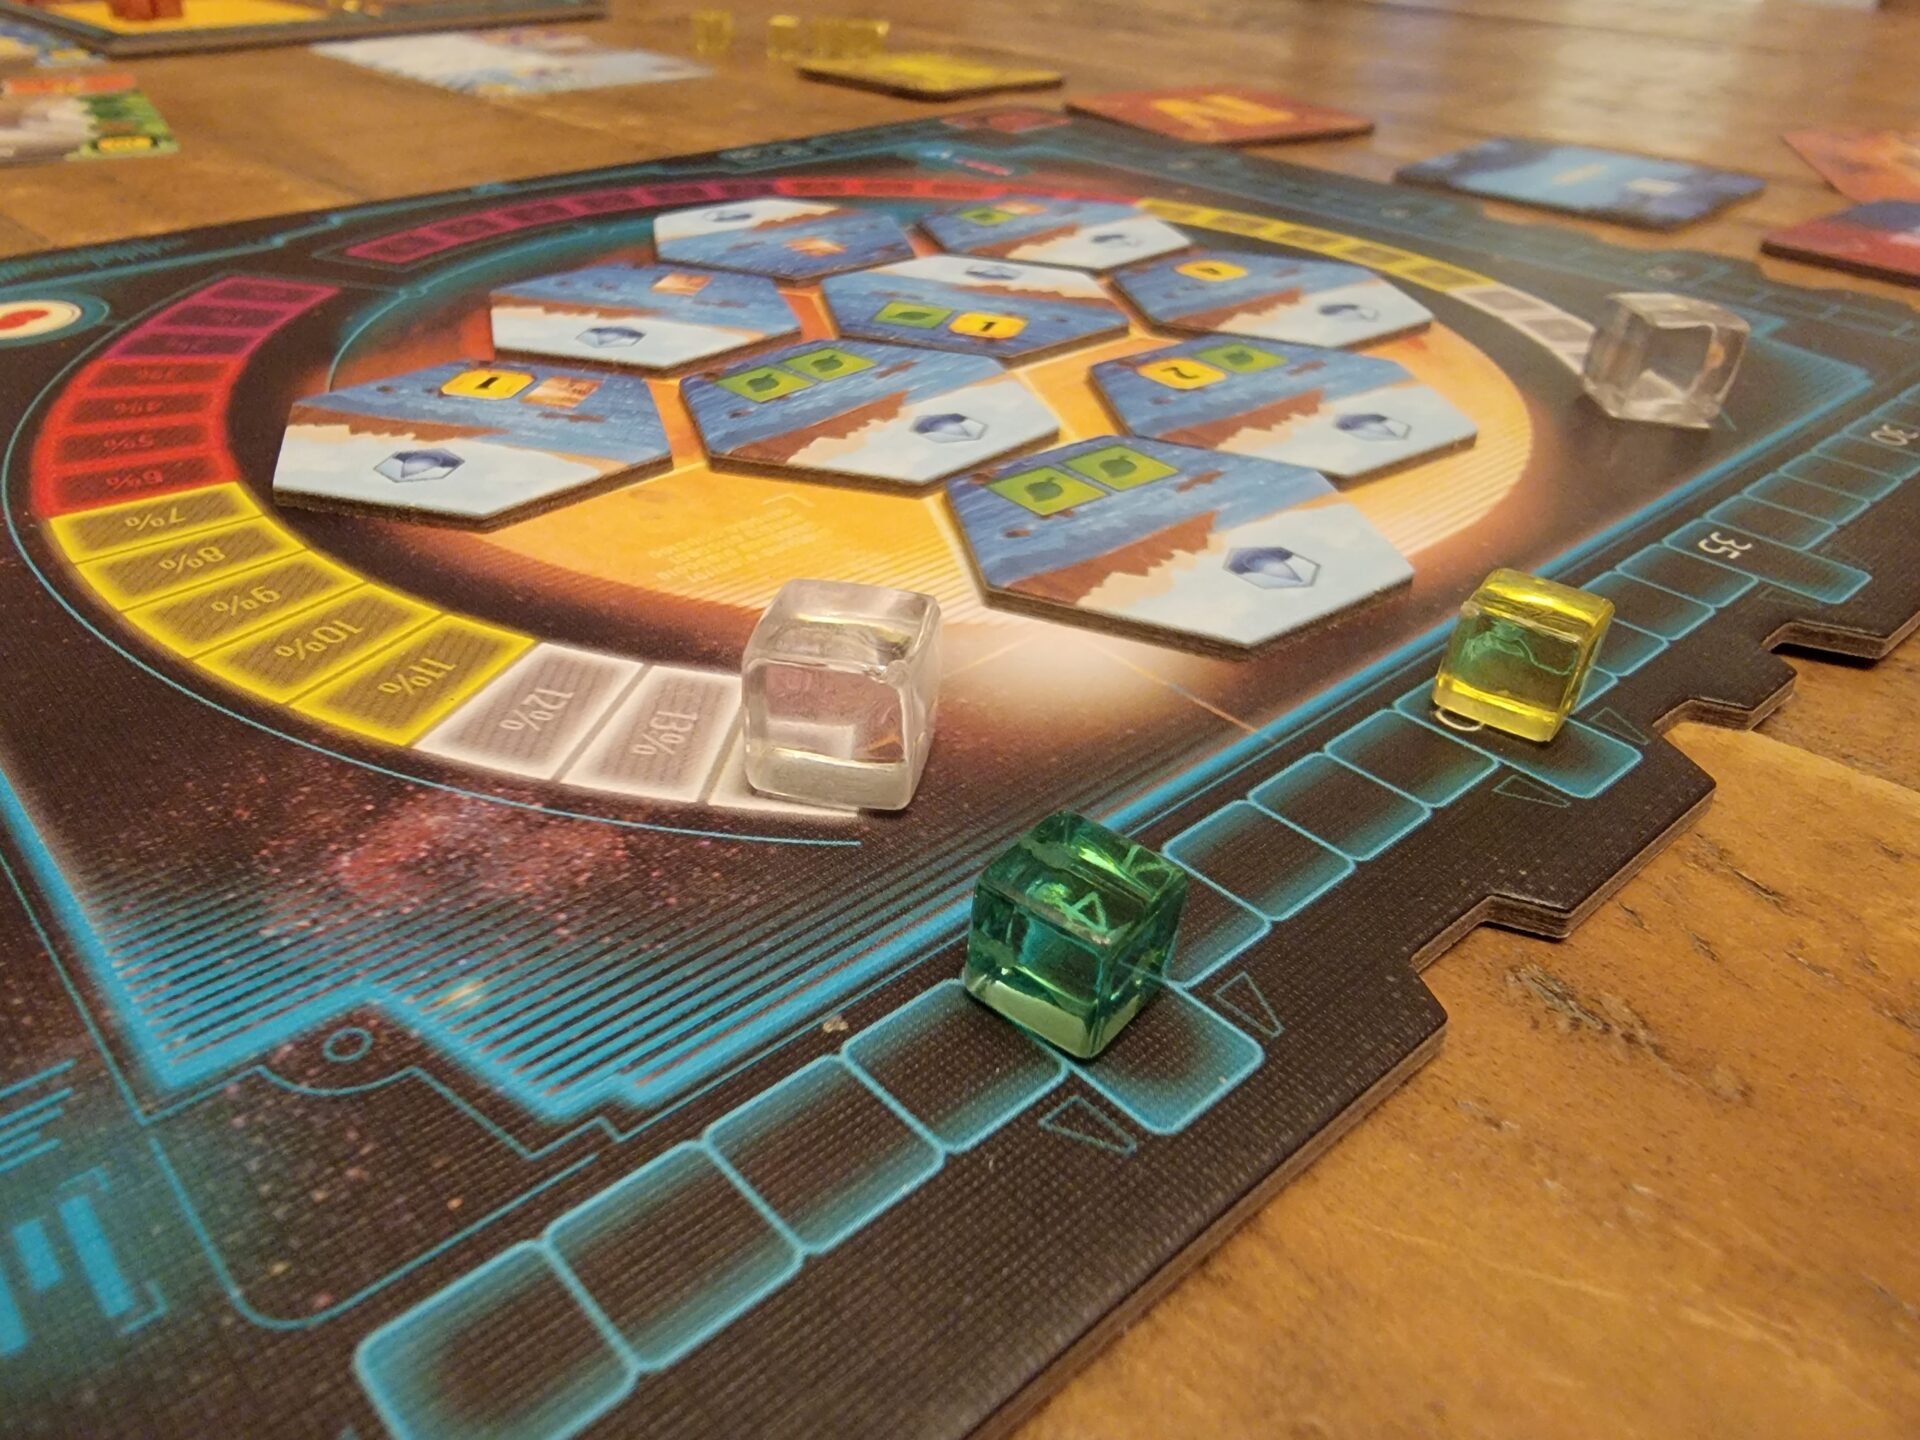 Terraforming Mars – Ares Expedition Review - Board Game Breakdown